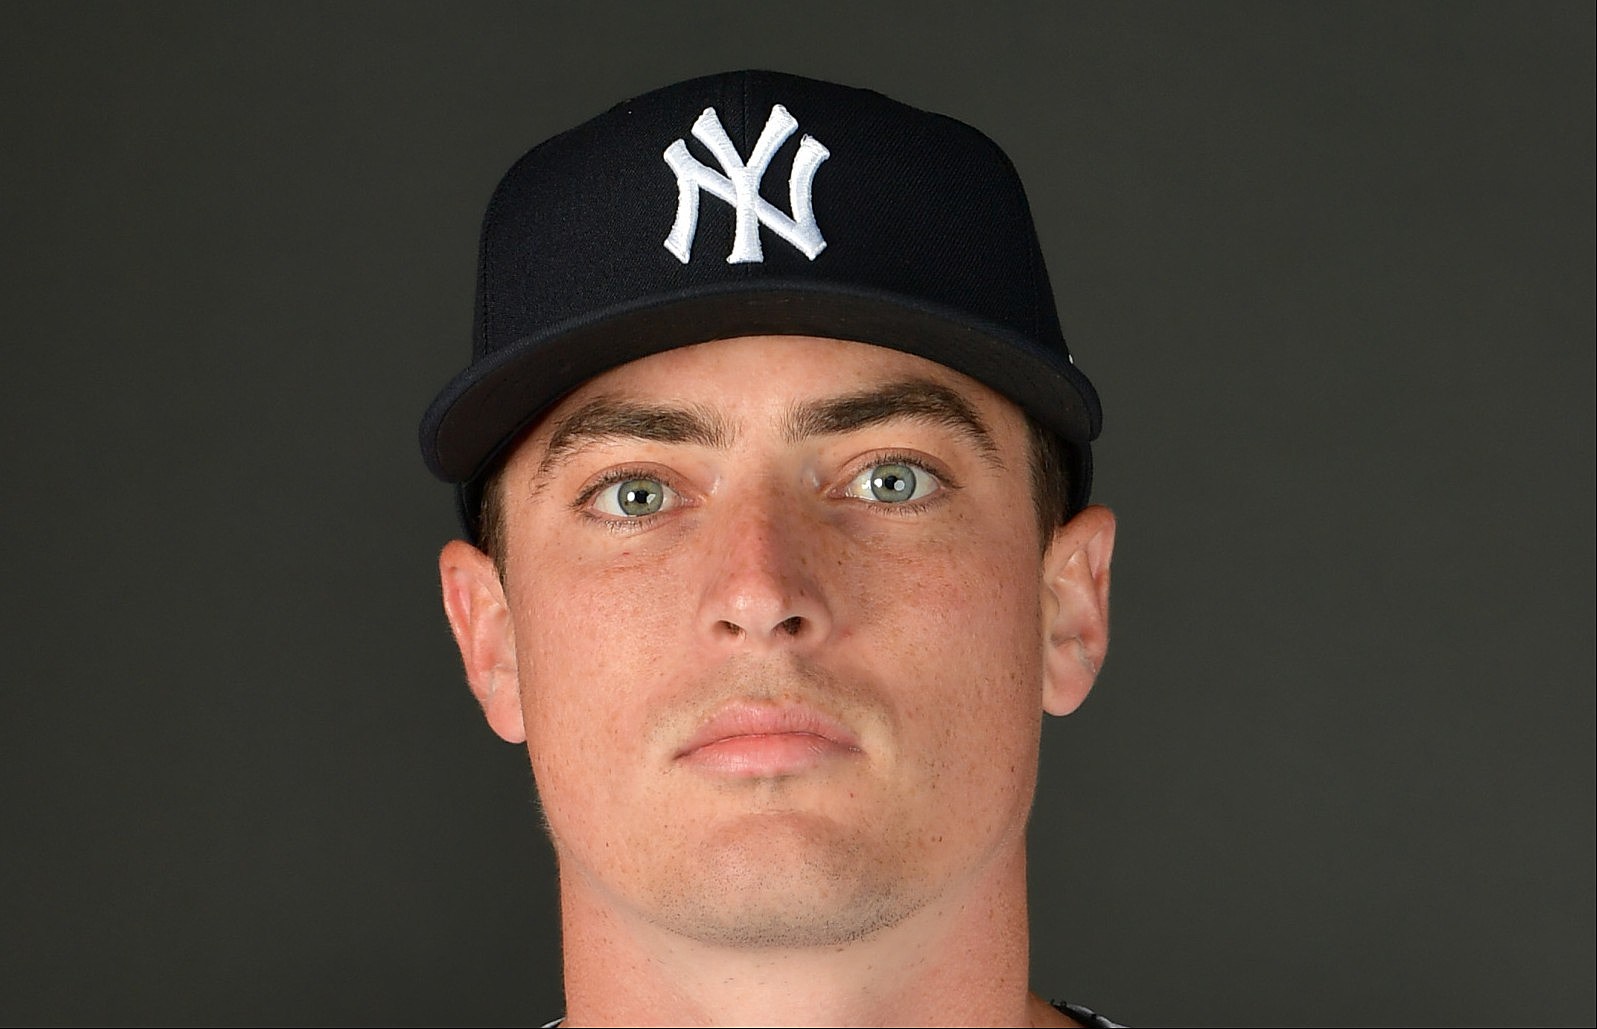 Toms River, NJ native makes New York Yankees Opening Day roster